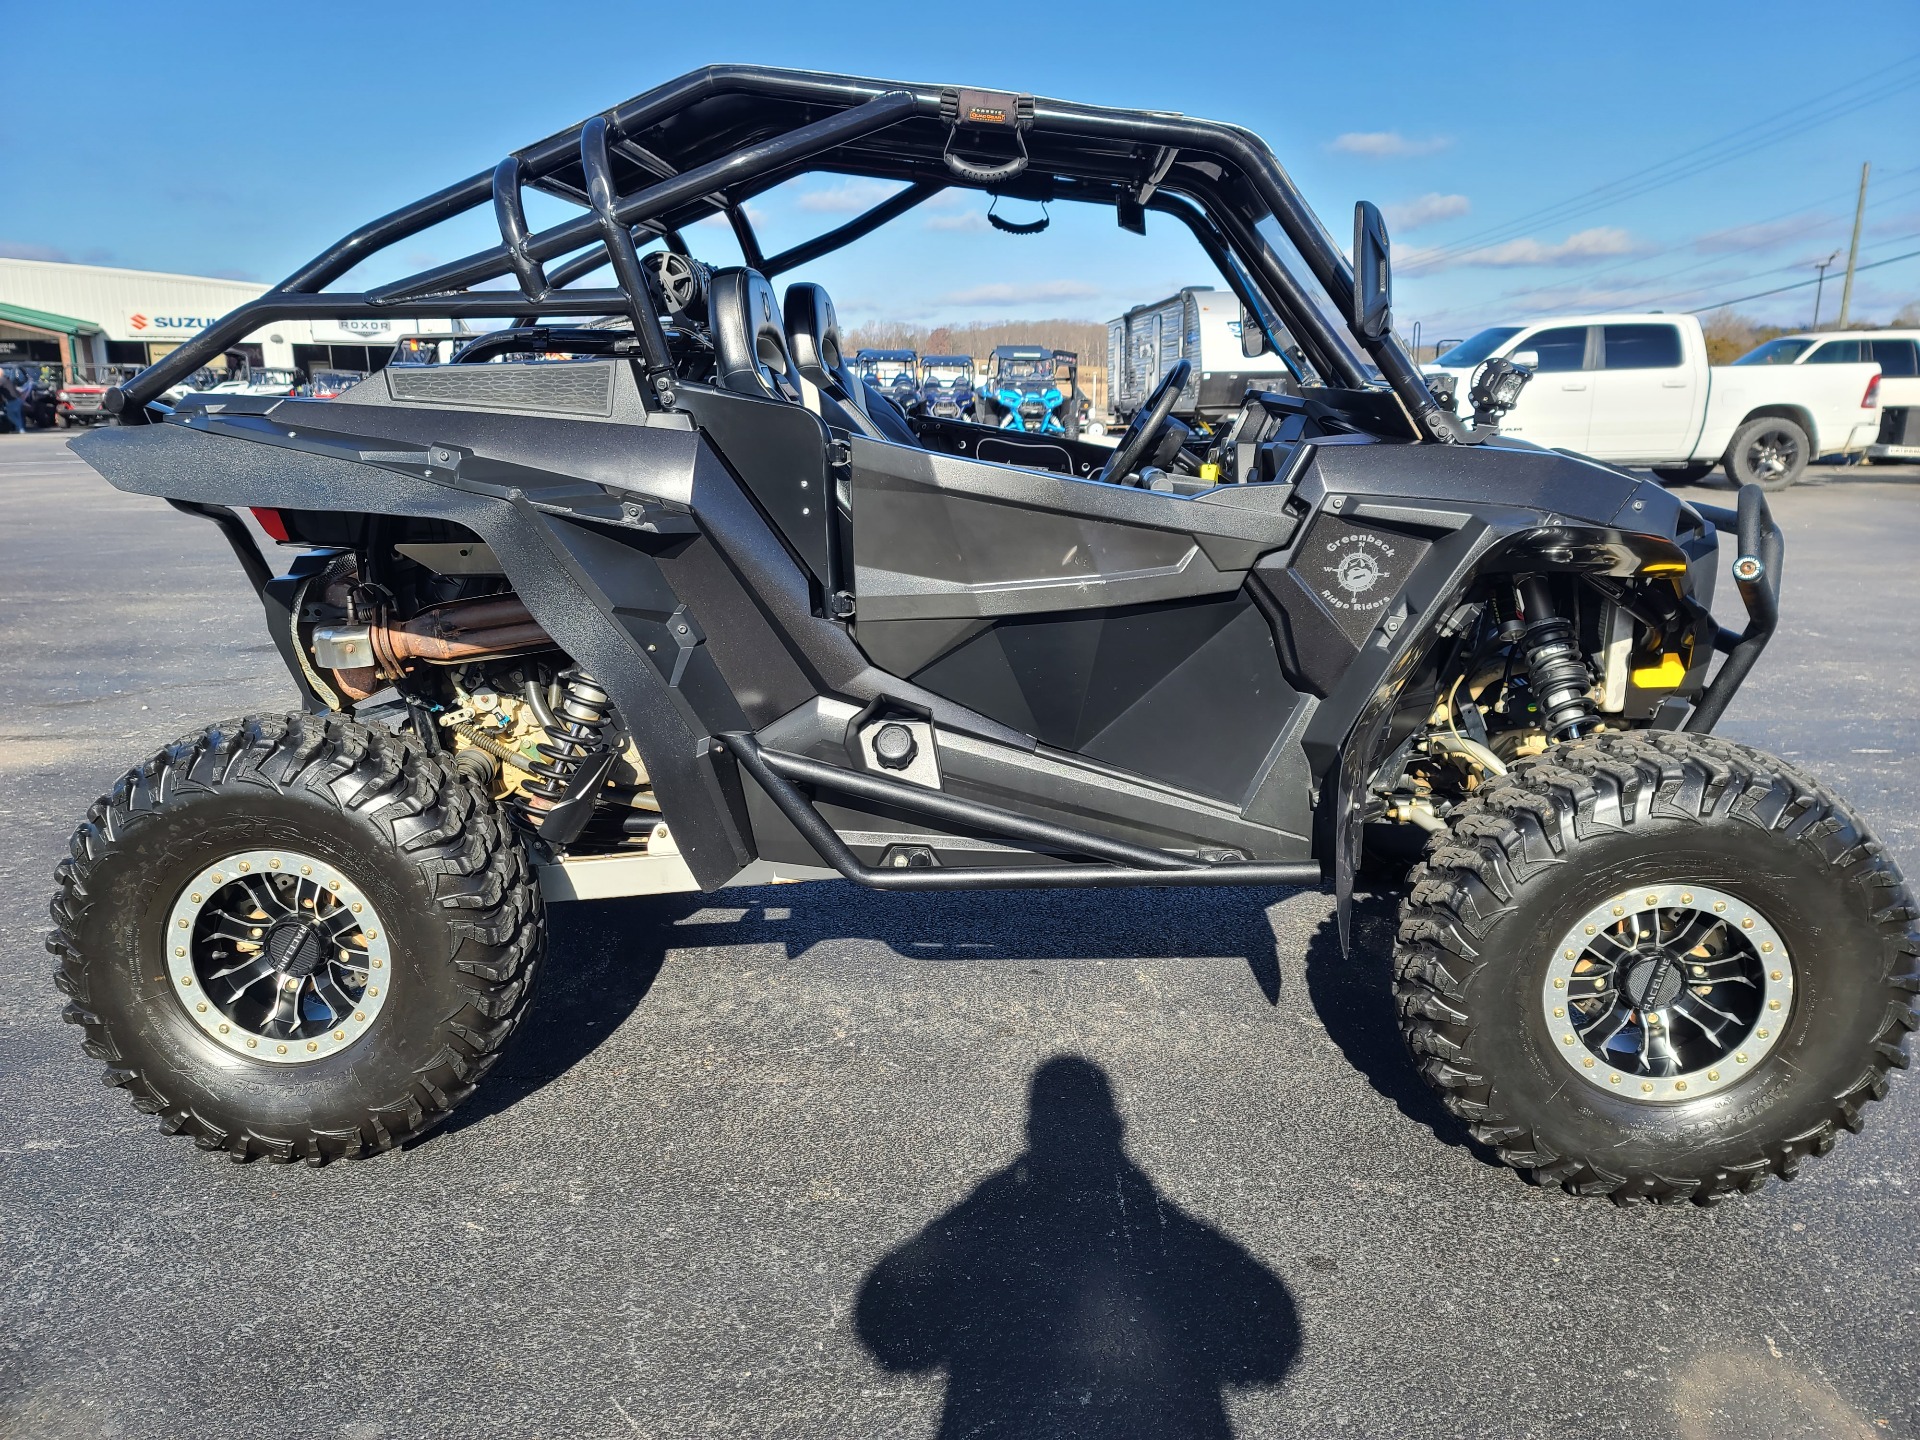 2018 Polaris RZR XP 1000 EPS Trails and Rocks Edition in Clinton, Tennessee - Photo 5